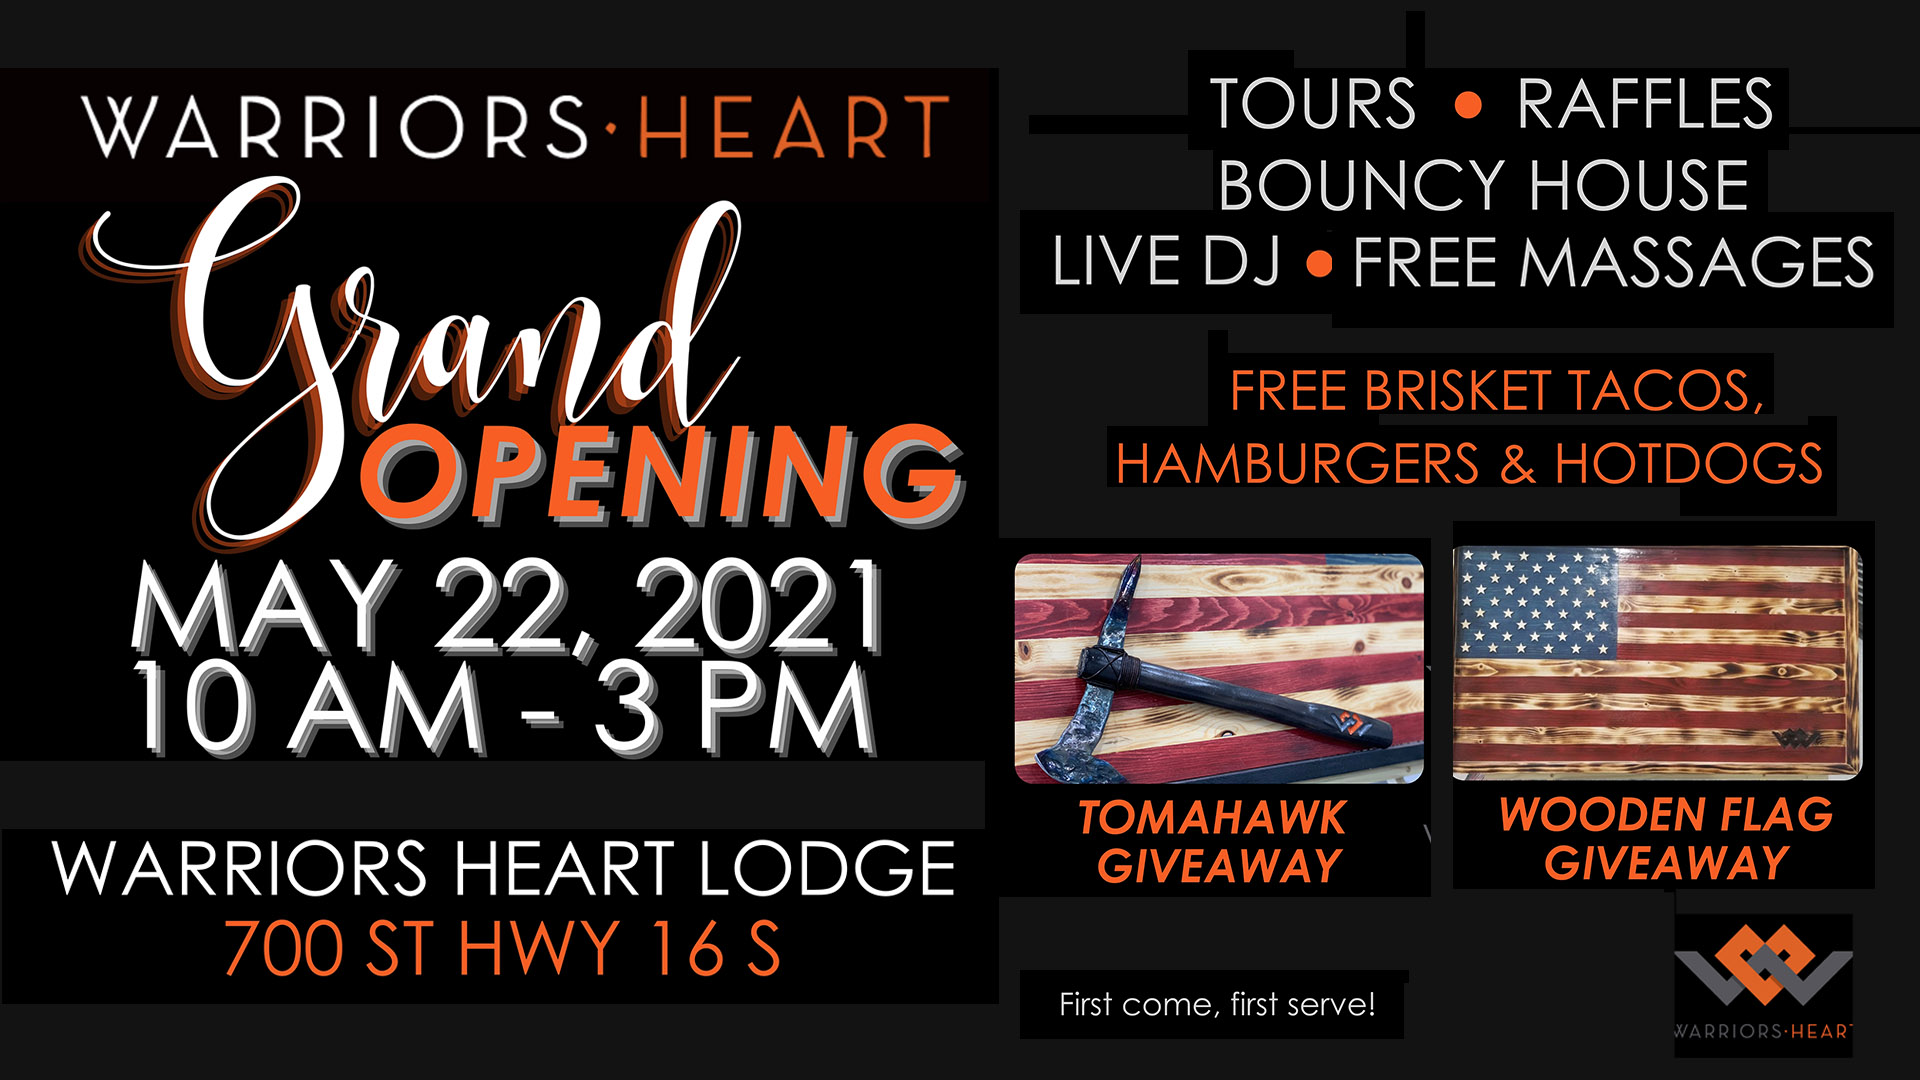 Warriors Heart will host the Warriors Heart Lodge Grand Opening on Saturday, May 22, 2021, 10:00am - 3:00pm CST on-site in sync with Mental Health Awareness Month (May), which is a free event.